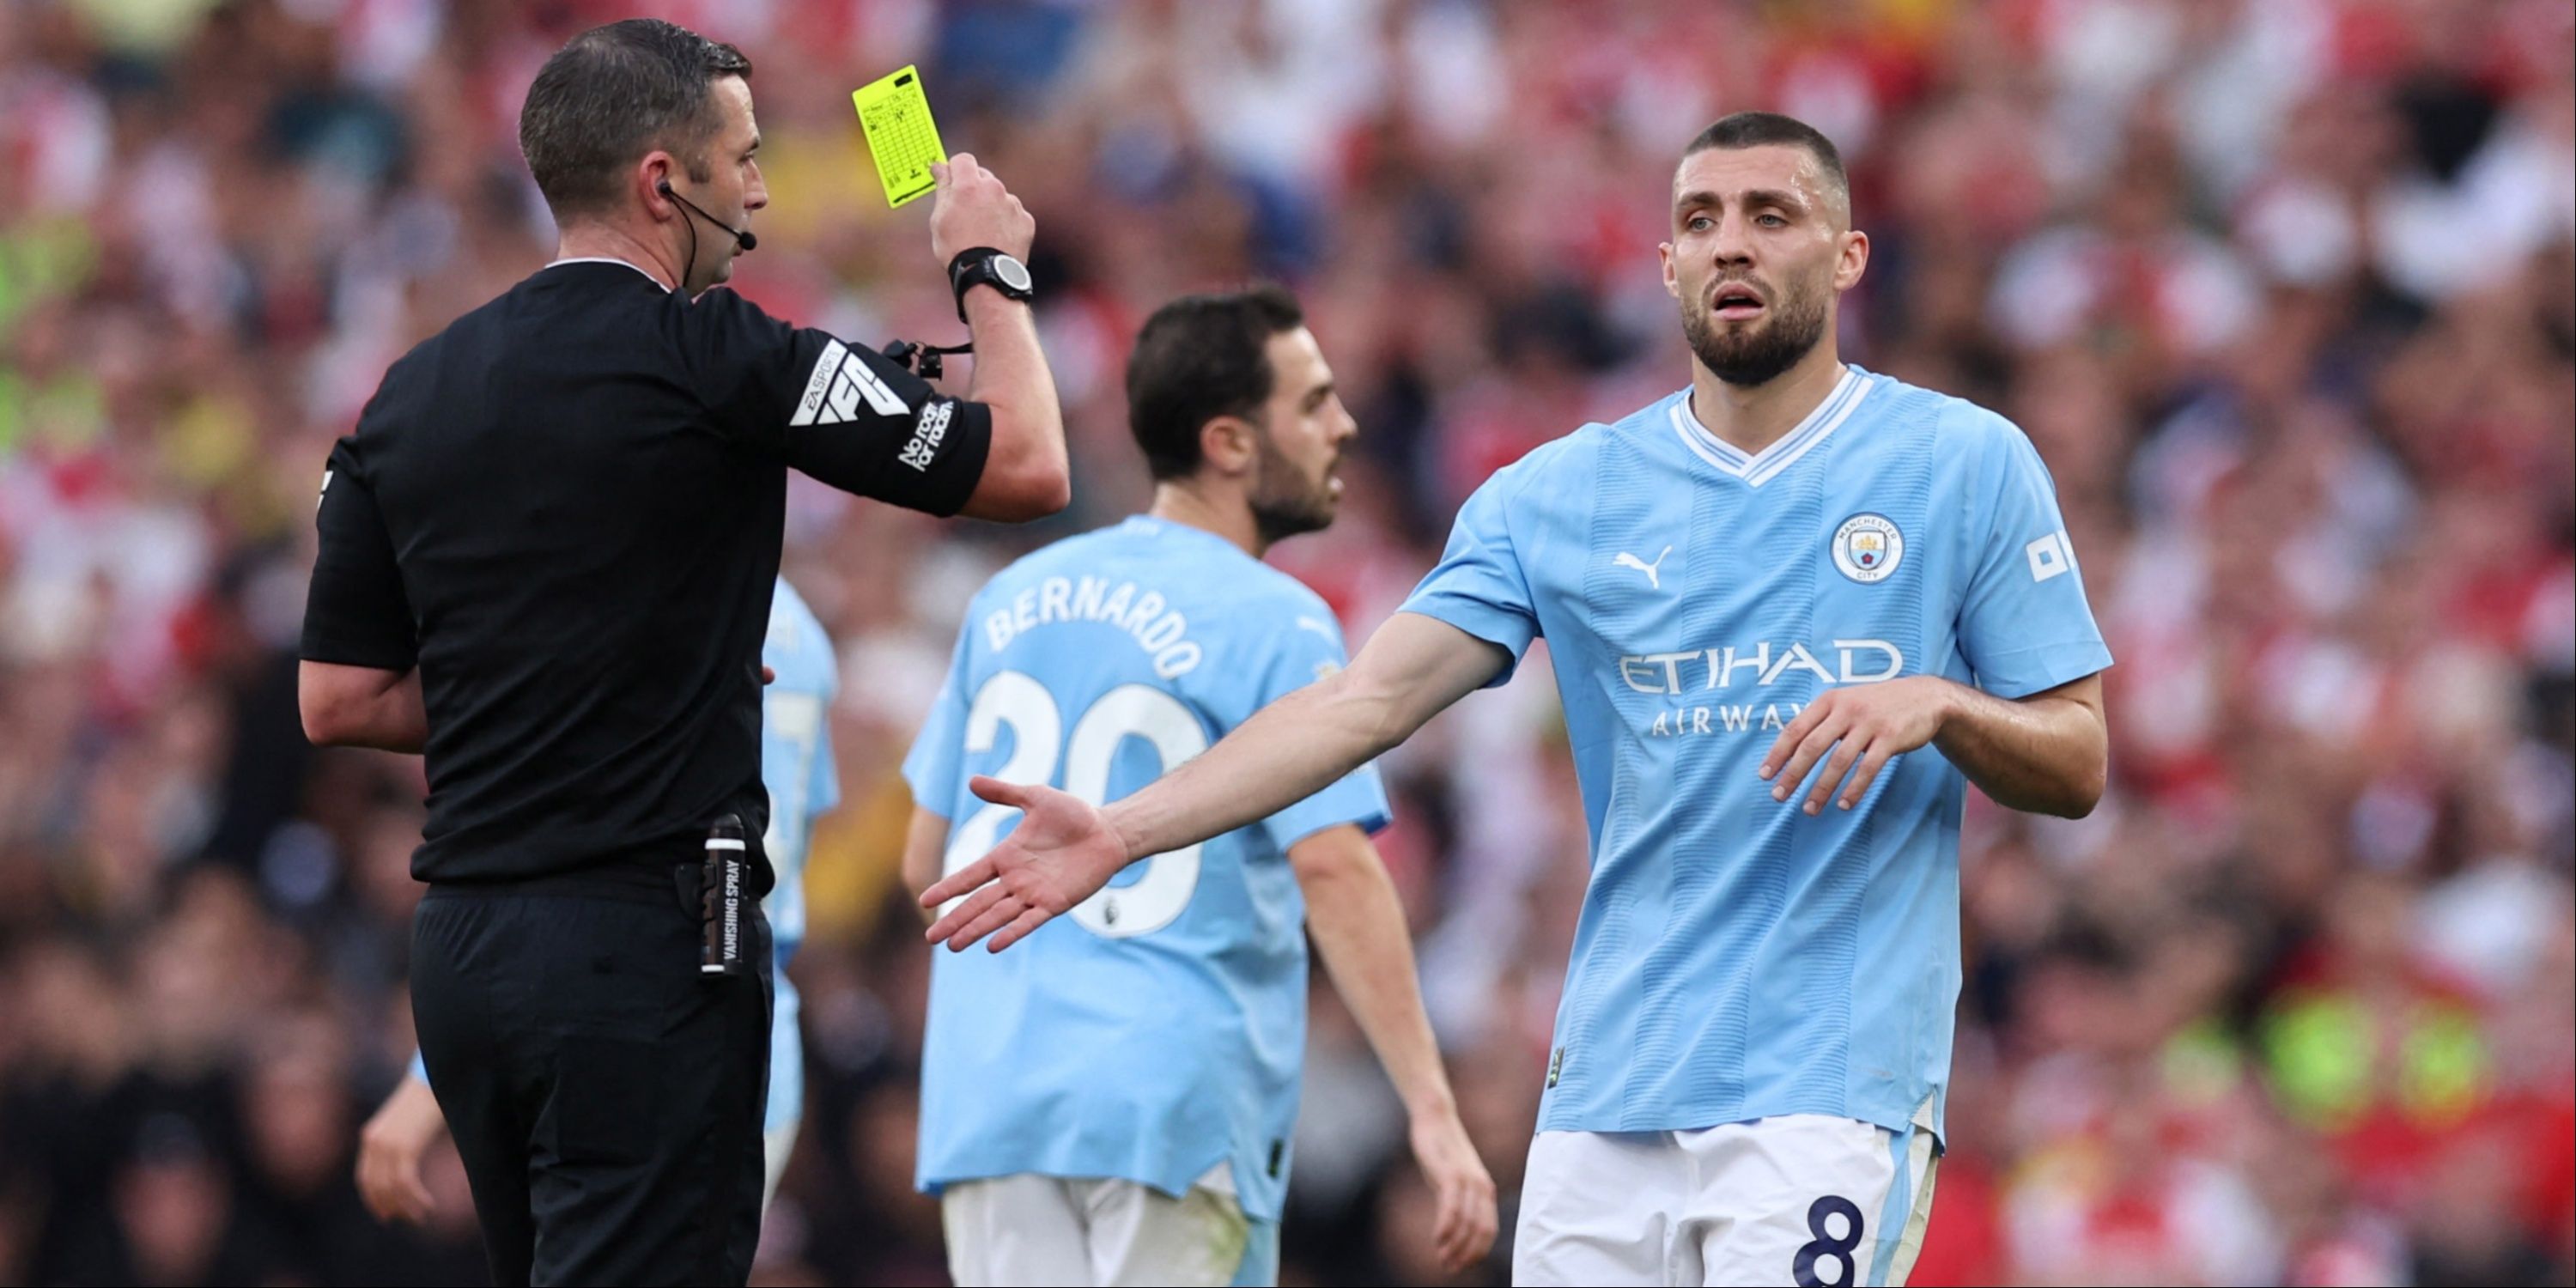 Manchester City's Mateo Kovacic is shown a yellow card